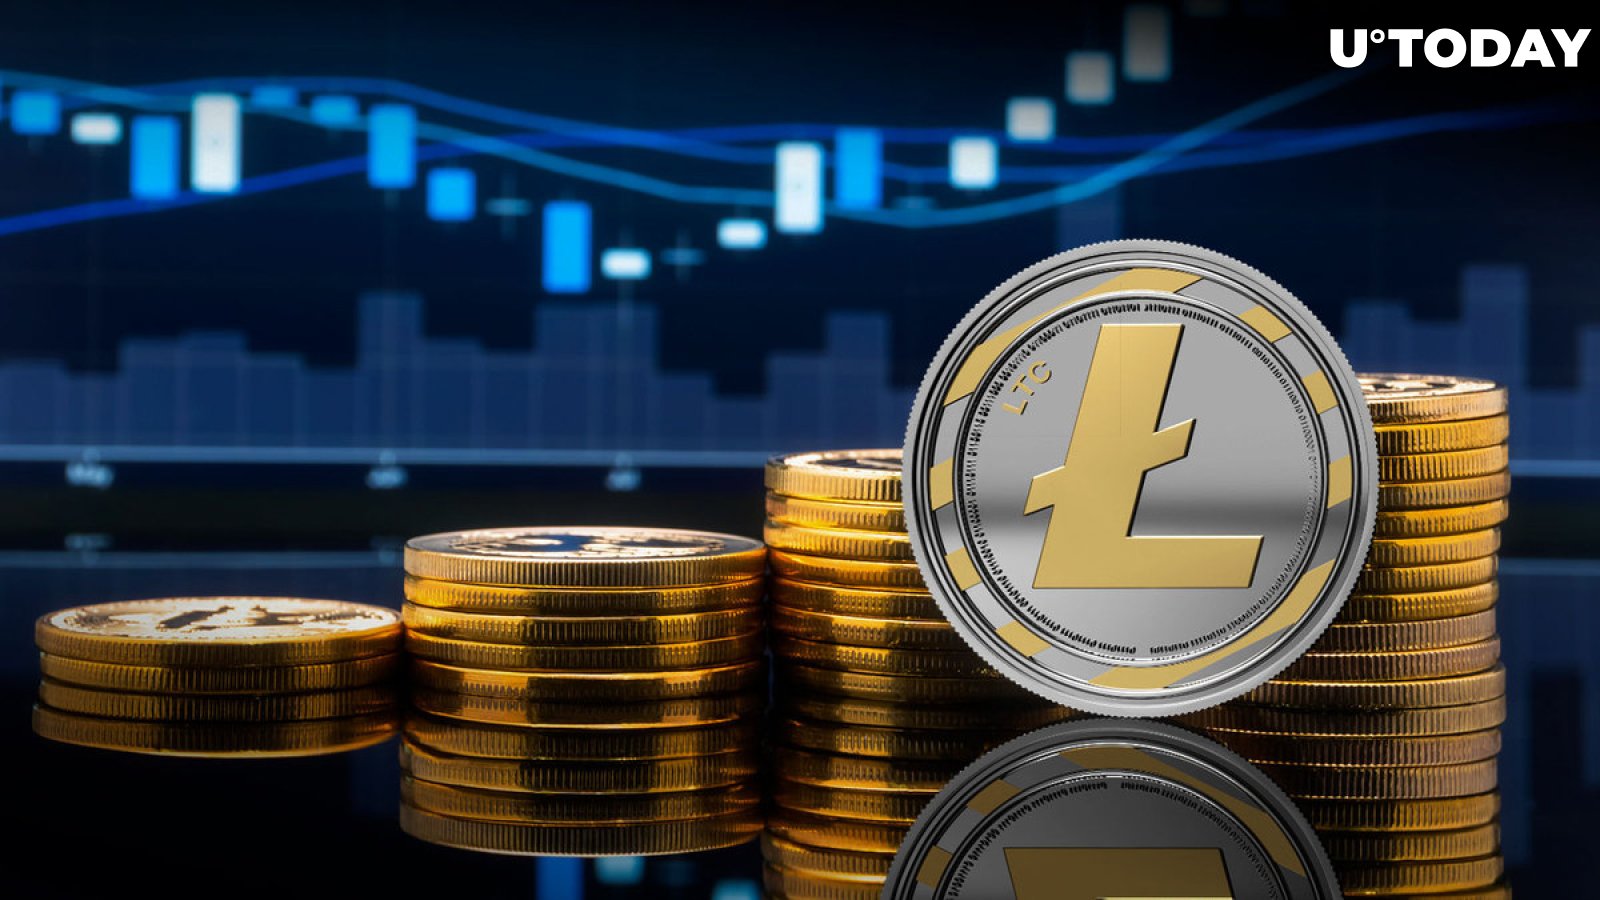 Litecoin (LTC) up 8% as On-Chain Activities Hit New High, What Comes Next?